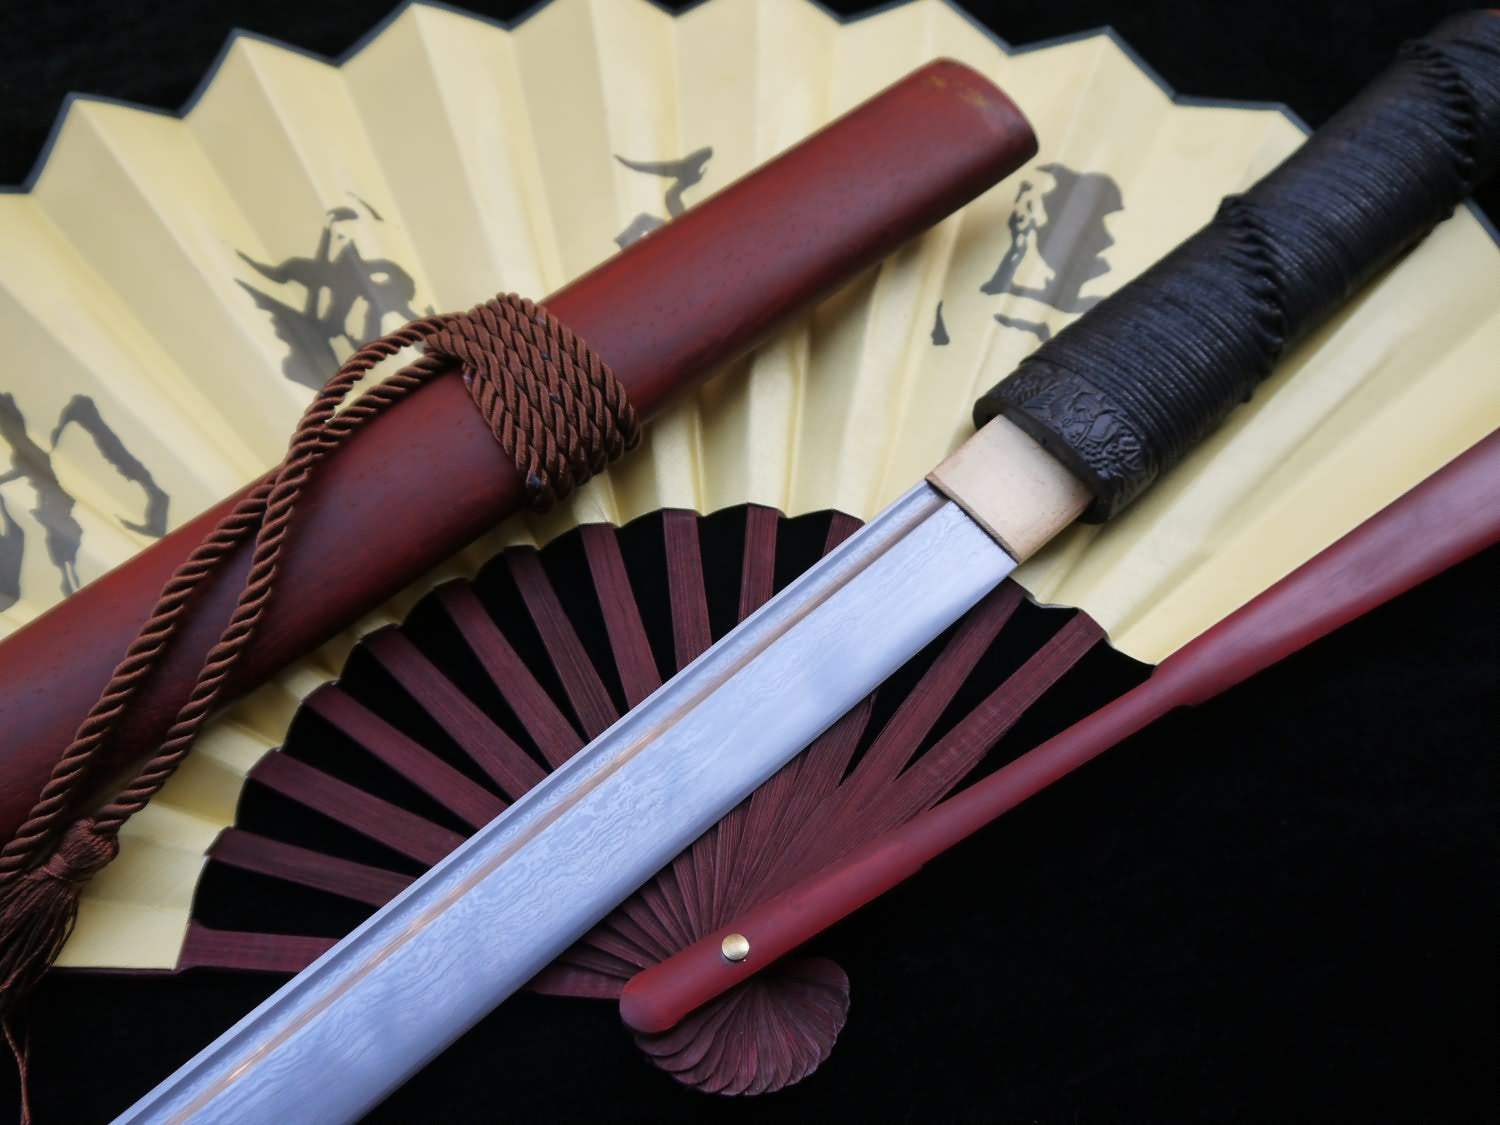 Tang sword,Folded steel,Redwood scabbard,Full tang,Length 39" - Chinese sword shop